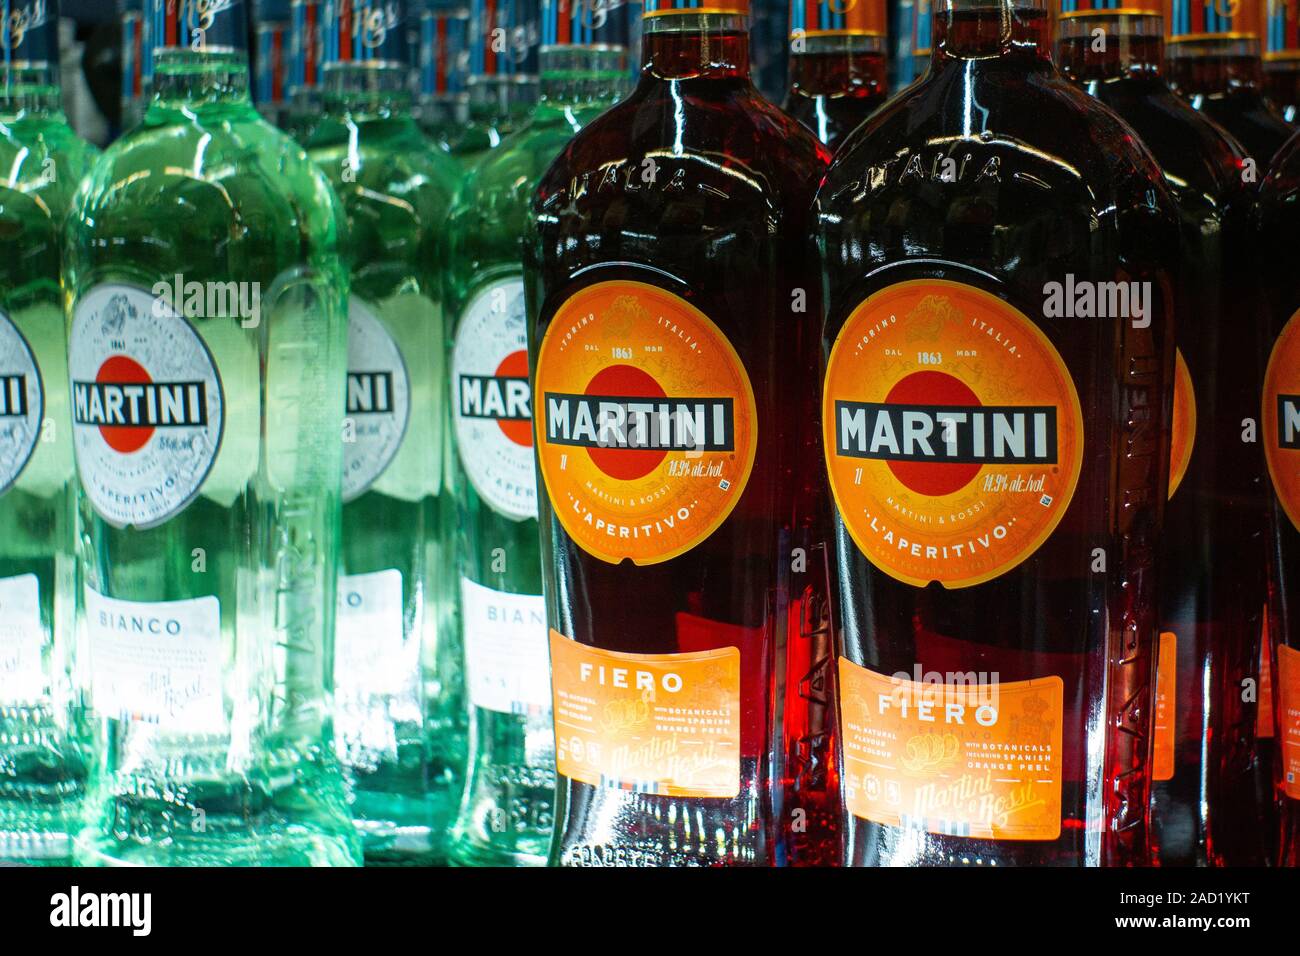 https://c8.alamy.com/comp/2AD1YKT/tyumen-russia-avg-25-2019-products-of-hypermarket-sale-martini-beverages-in-the-store-metro-cash-and-carry-martini-alcohol-sale-in-store-2AD1YKT.jpg